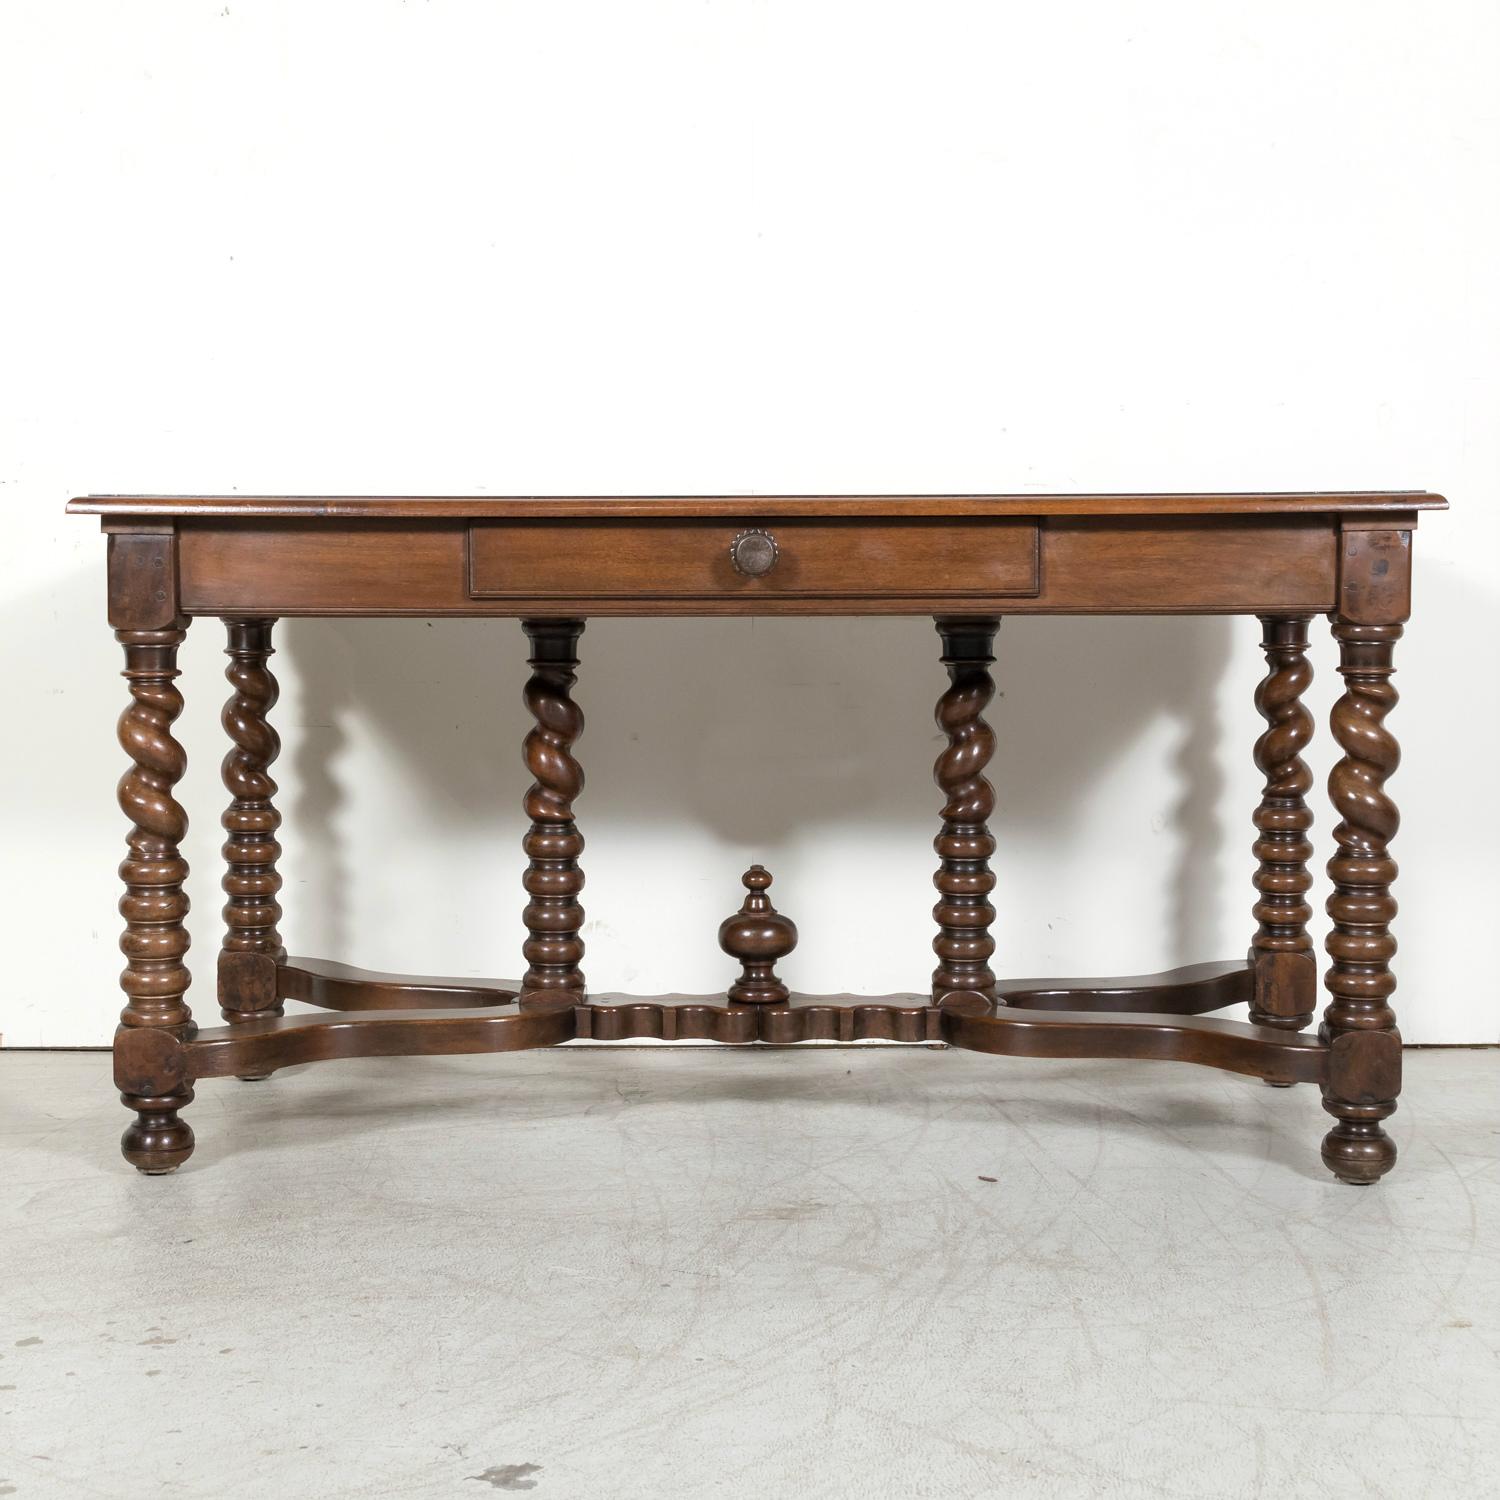 Late 19th Century 19th Century French Louis XIII Style Walnut Barley Twist Console Table For Sale